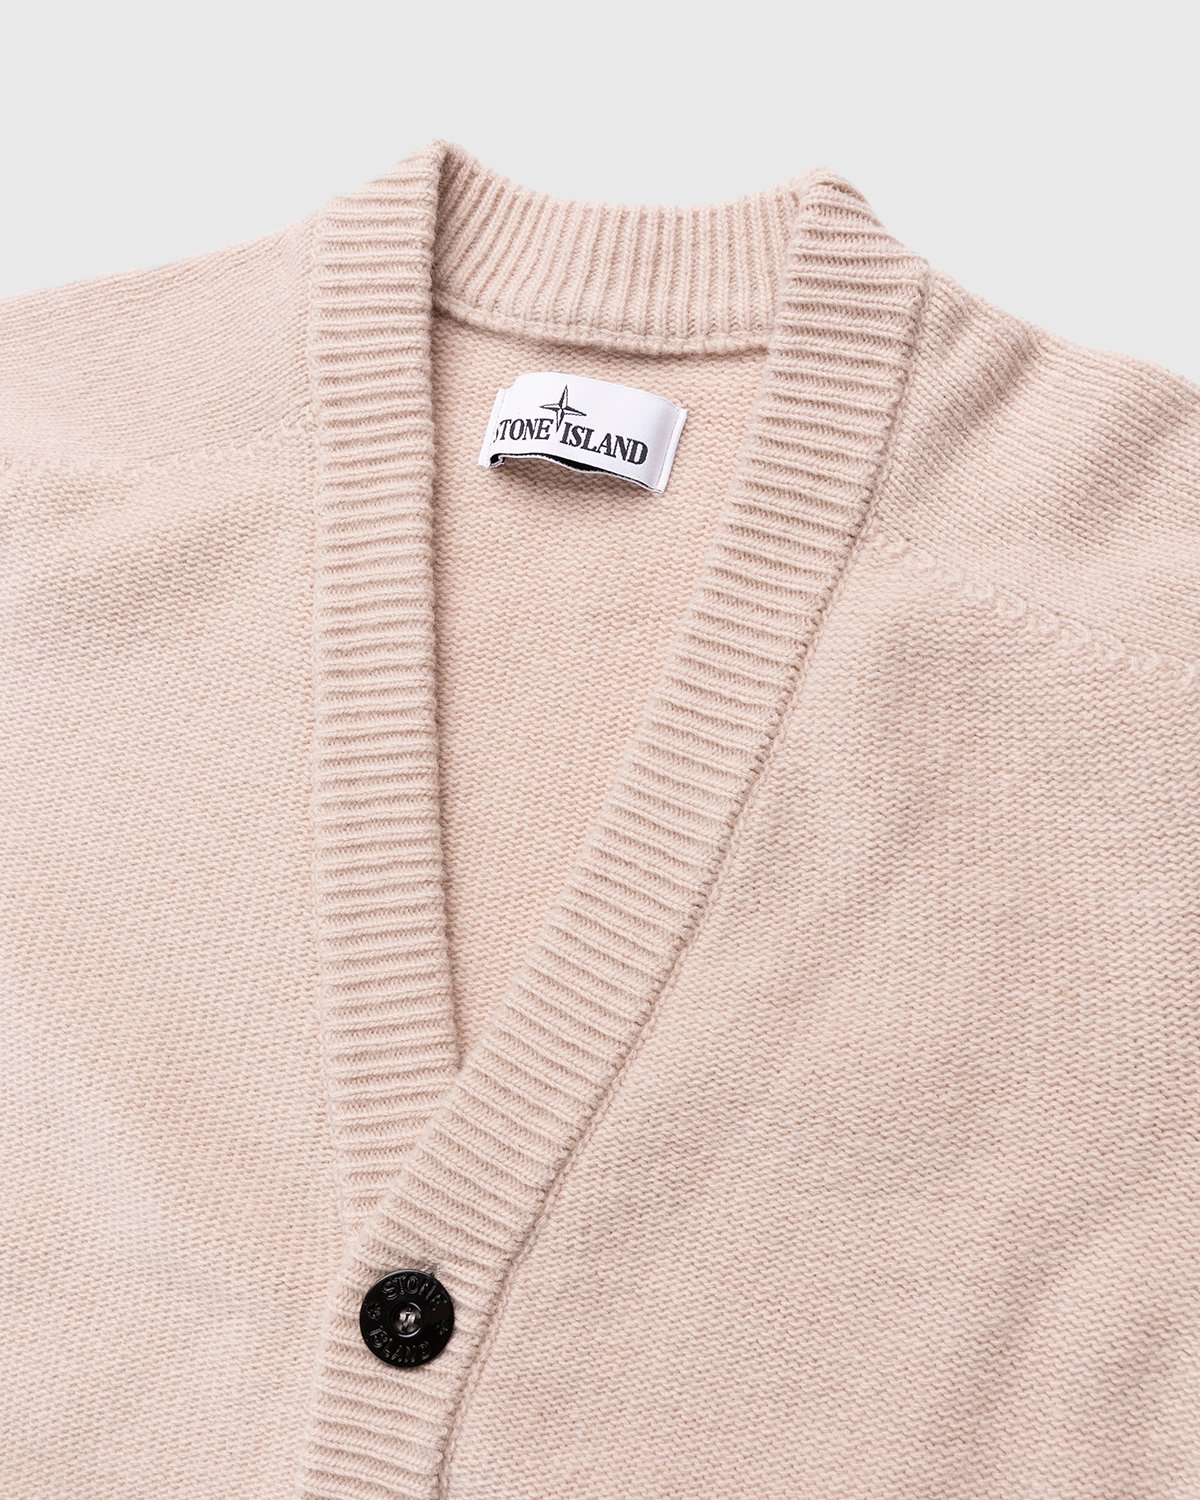 Stone Island - Knitted Cardigan Rustic Rose - Clothing - Red - Image 6